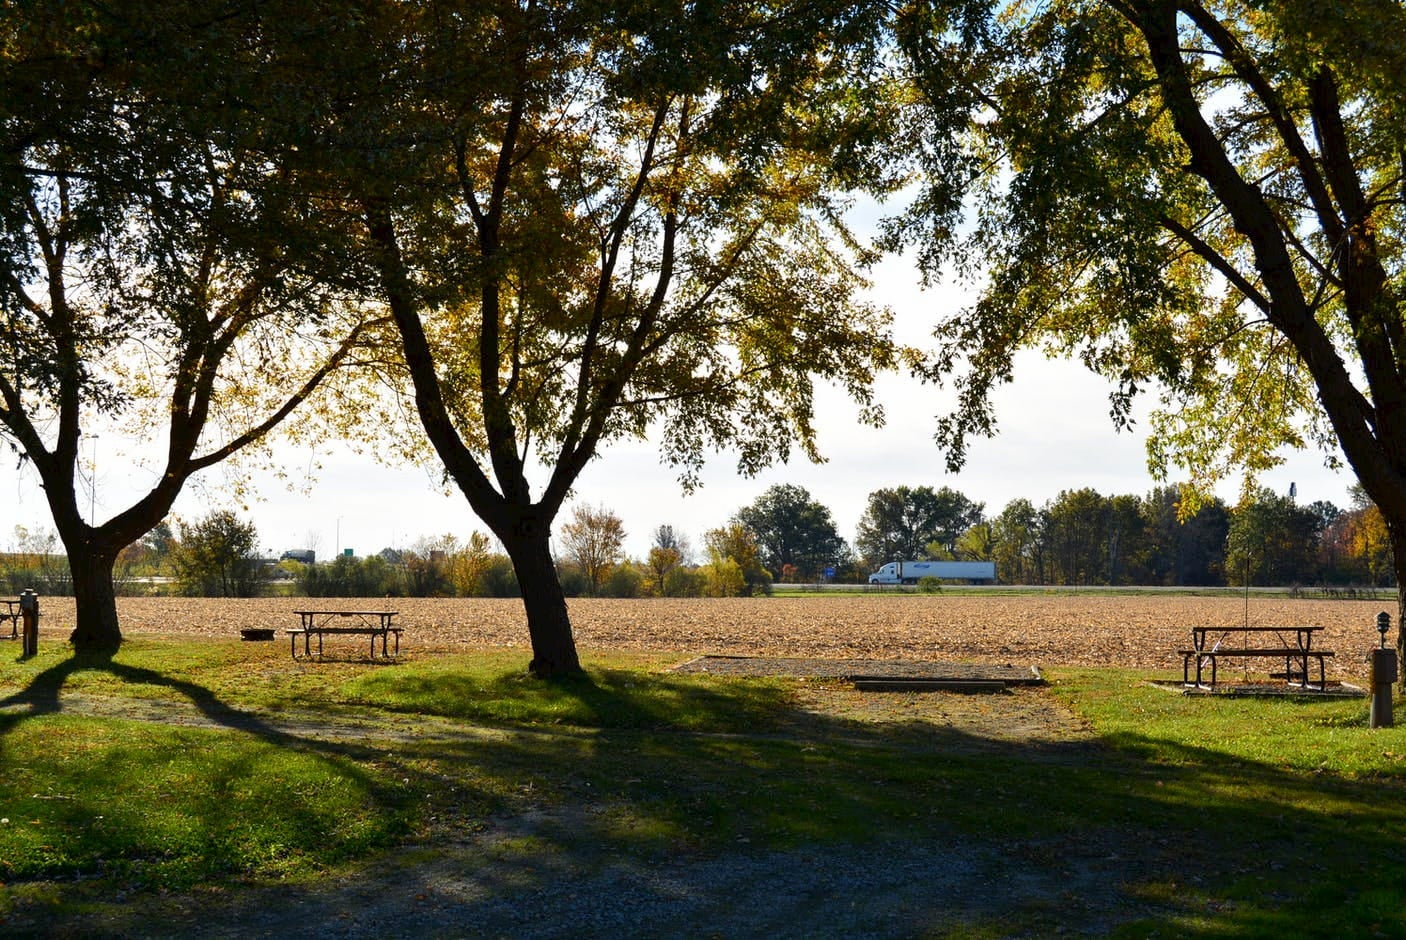 Campsite beside a corn field in the midwest shaded by large trees.